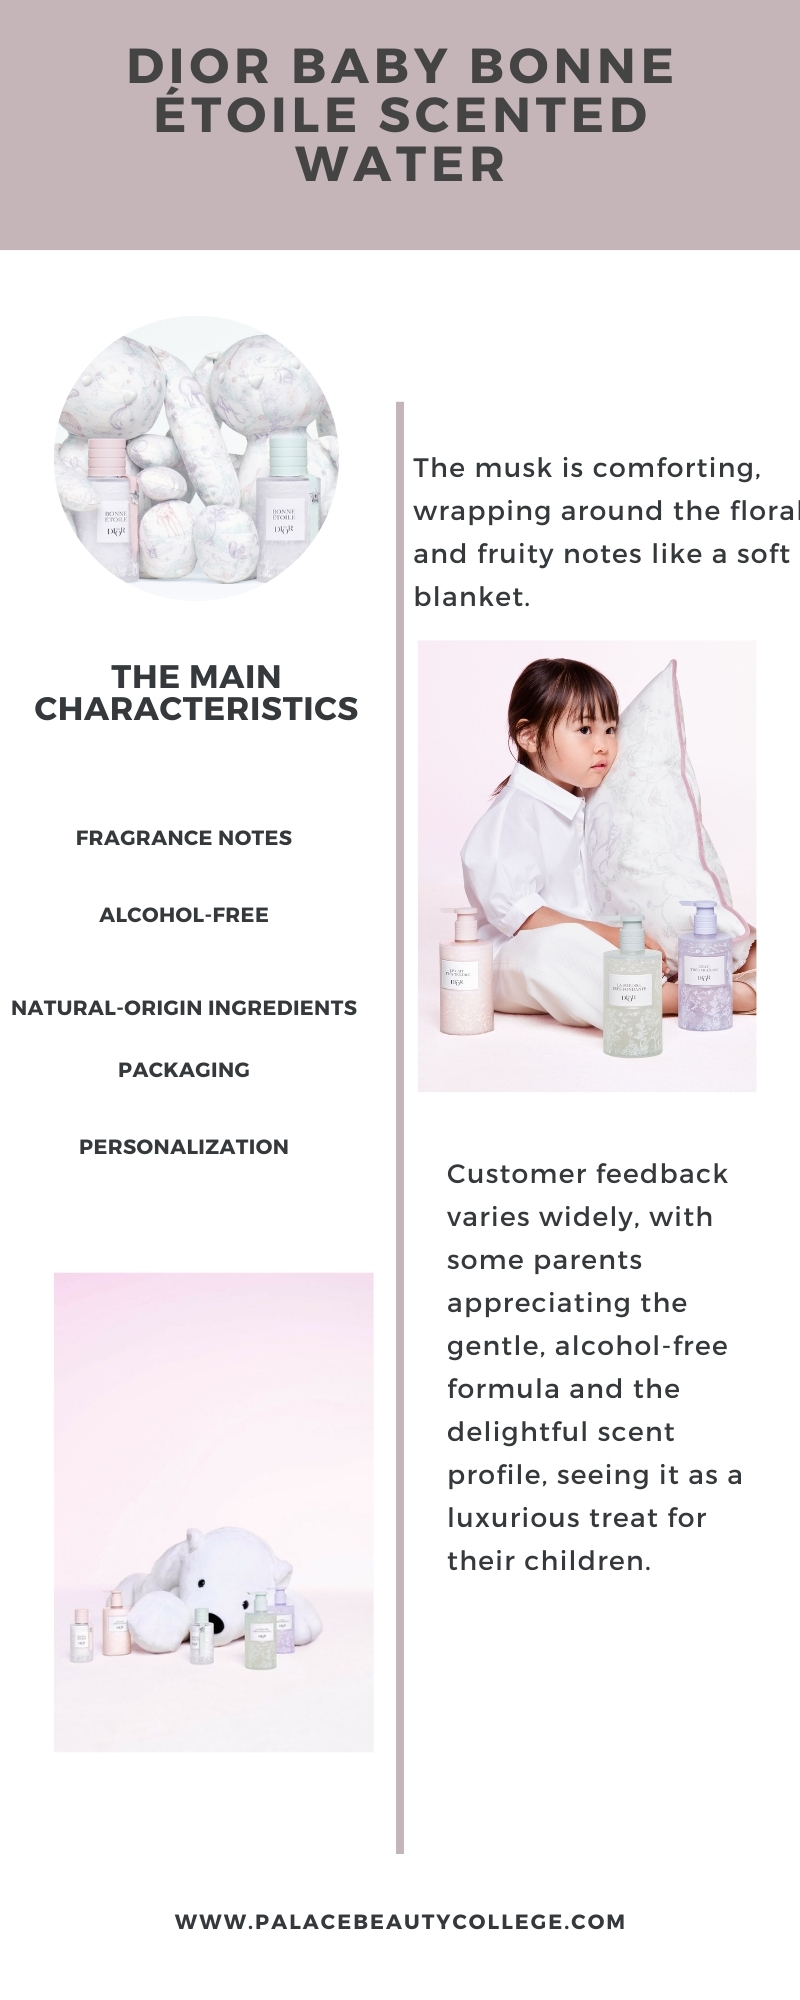 Dior Baby Bonne Étoile Scented Water infographic